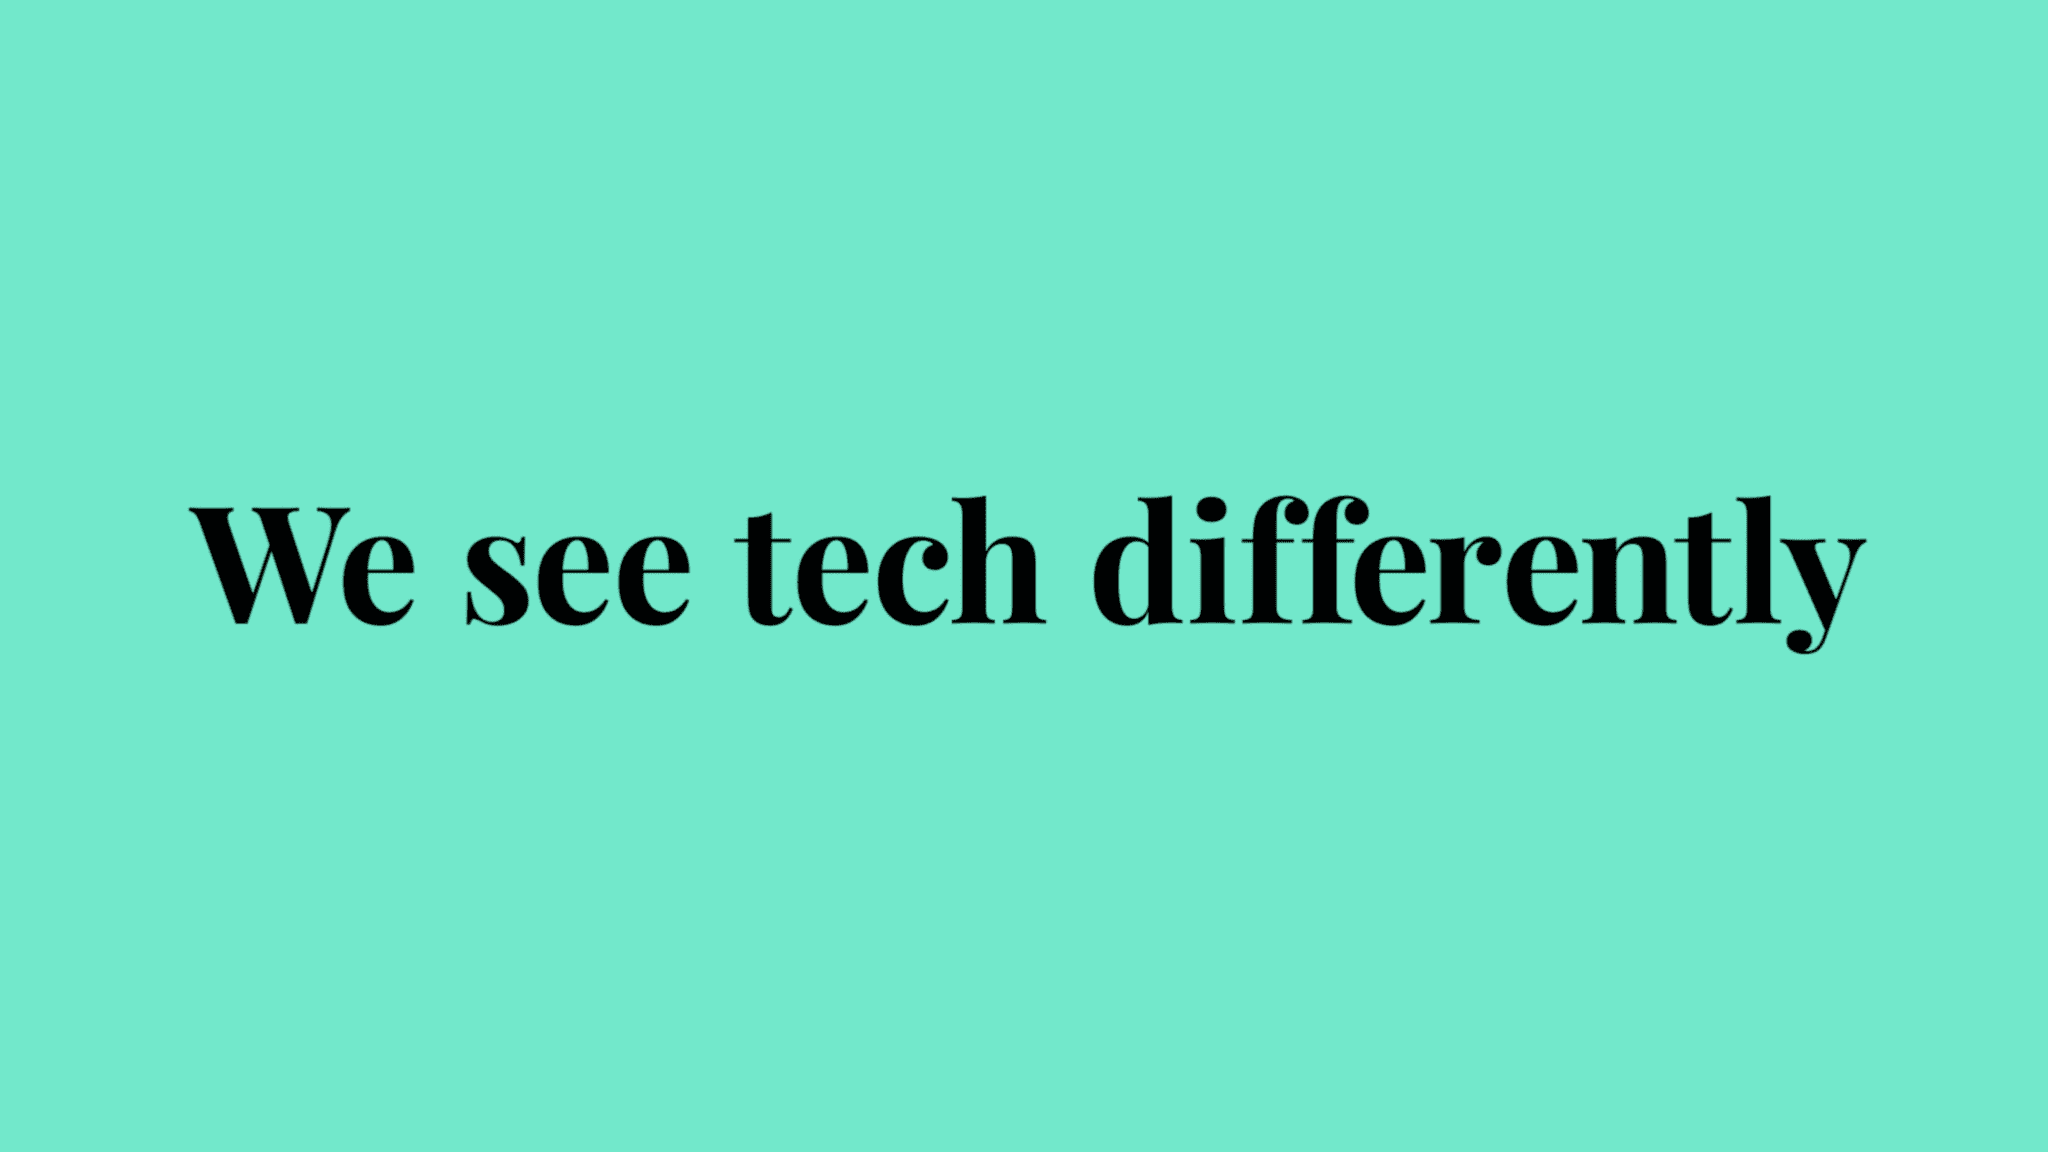 We see tech differently